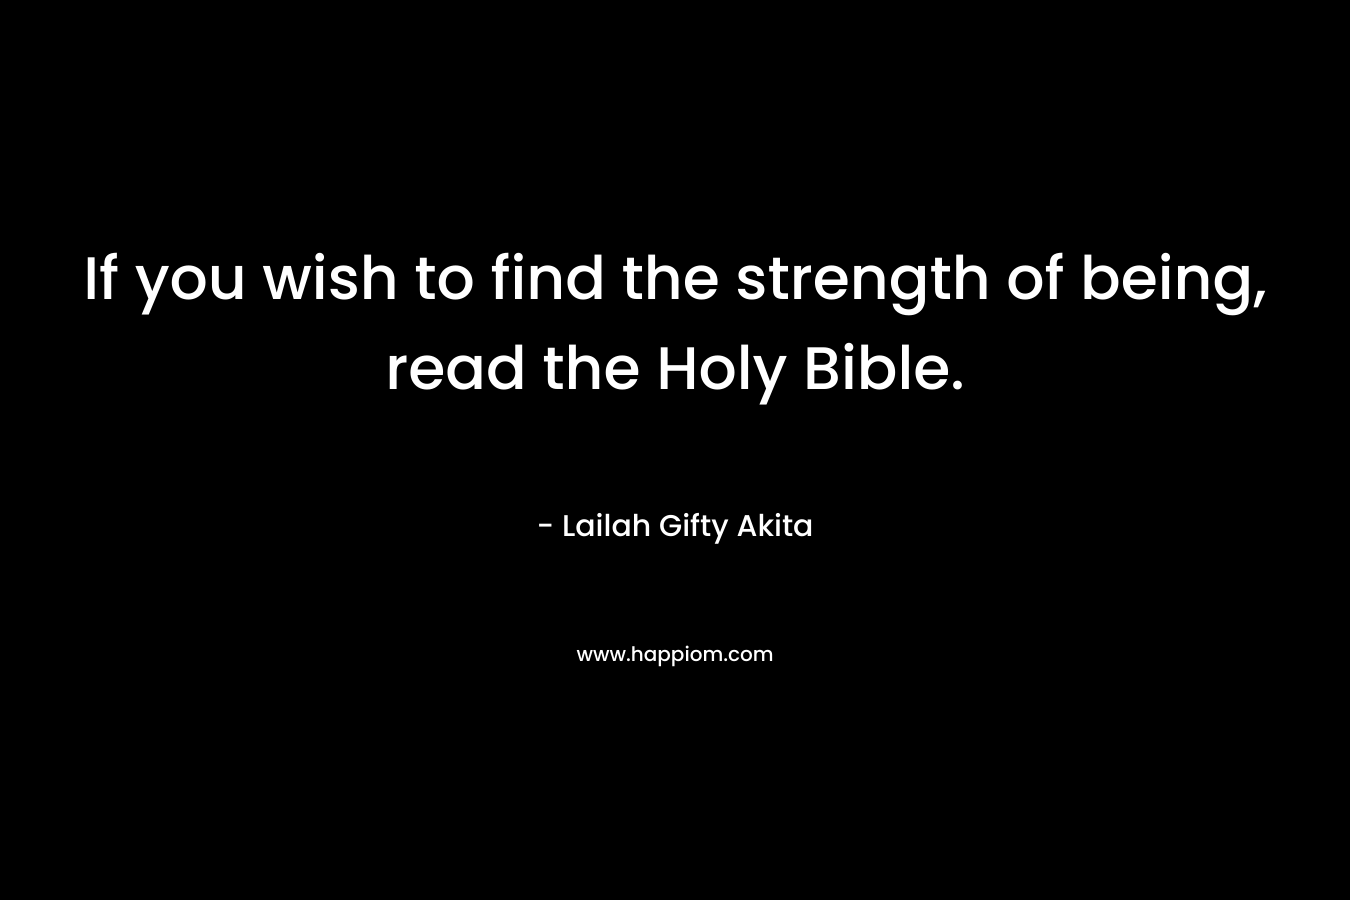 If you wish to find the strength of being, read the Holy Bible.